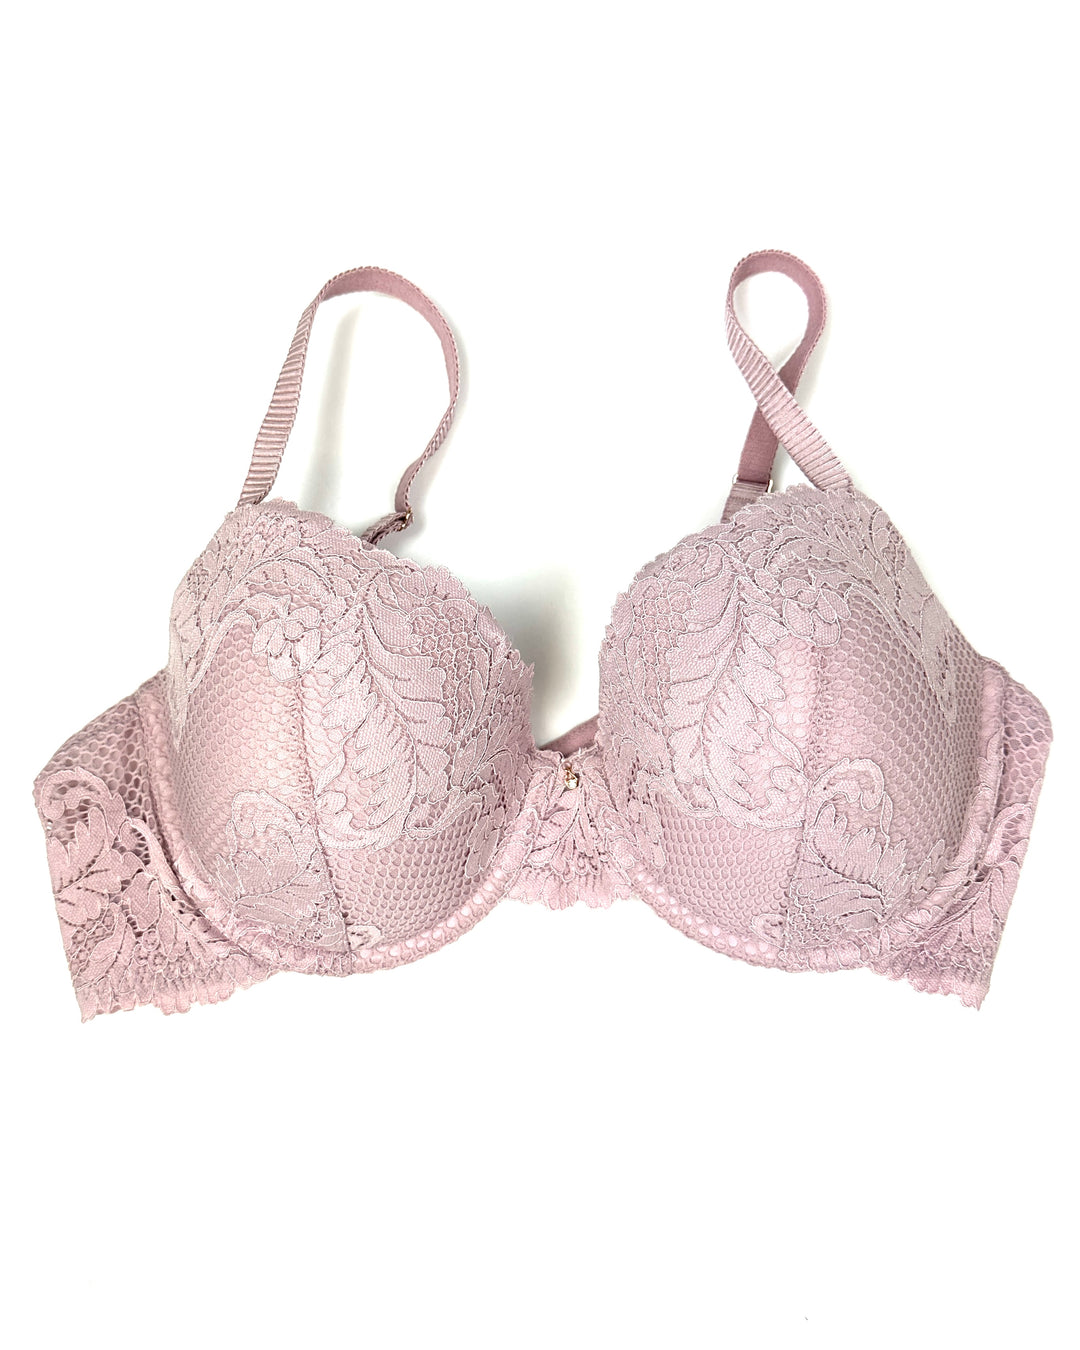 Pink Lace Underwire Bra - 34B and 34D